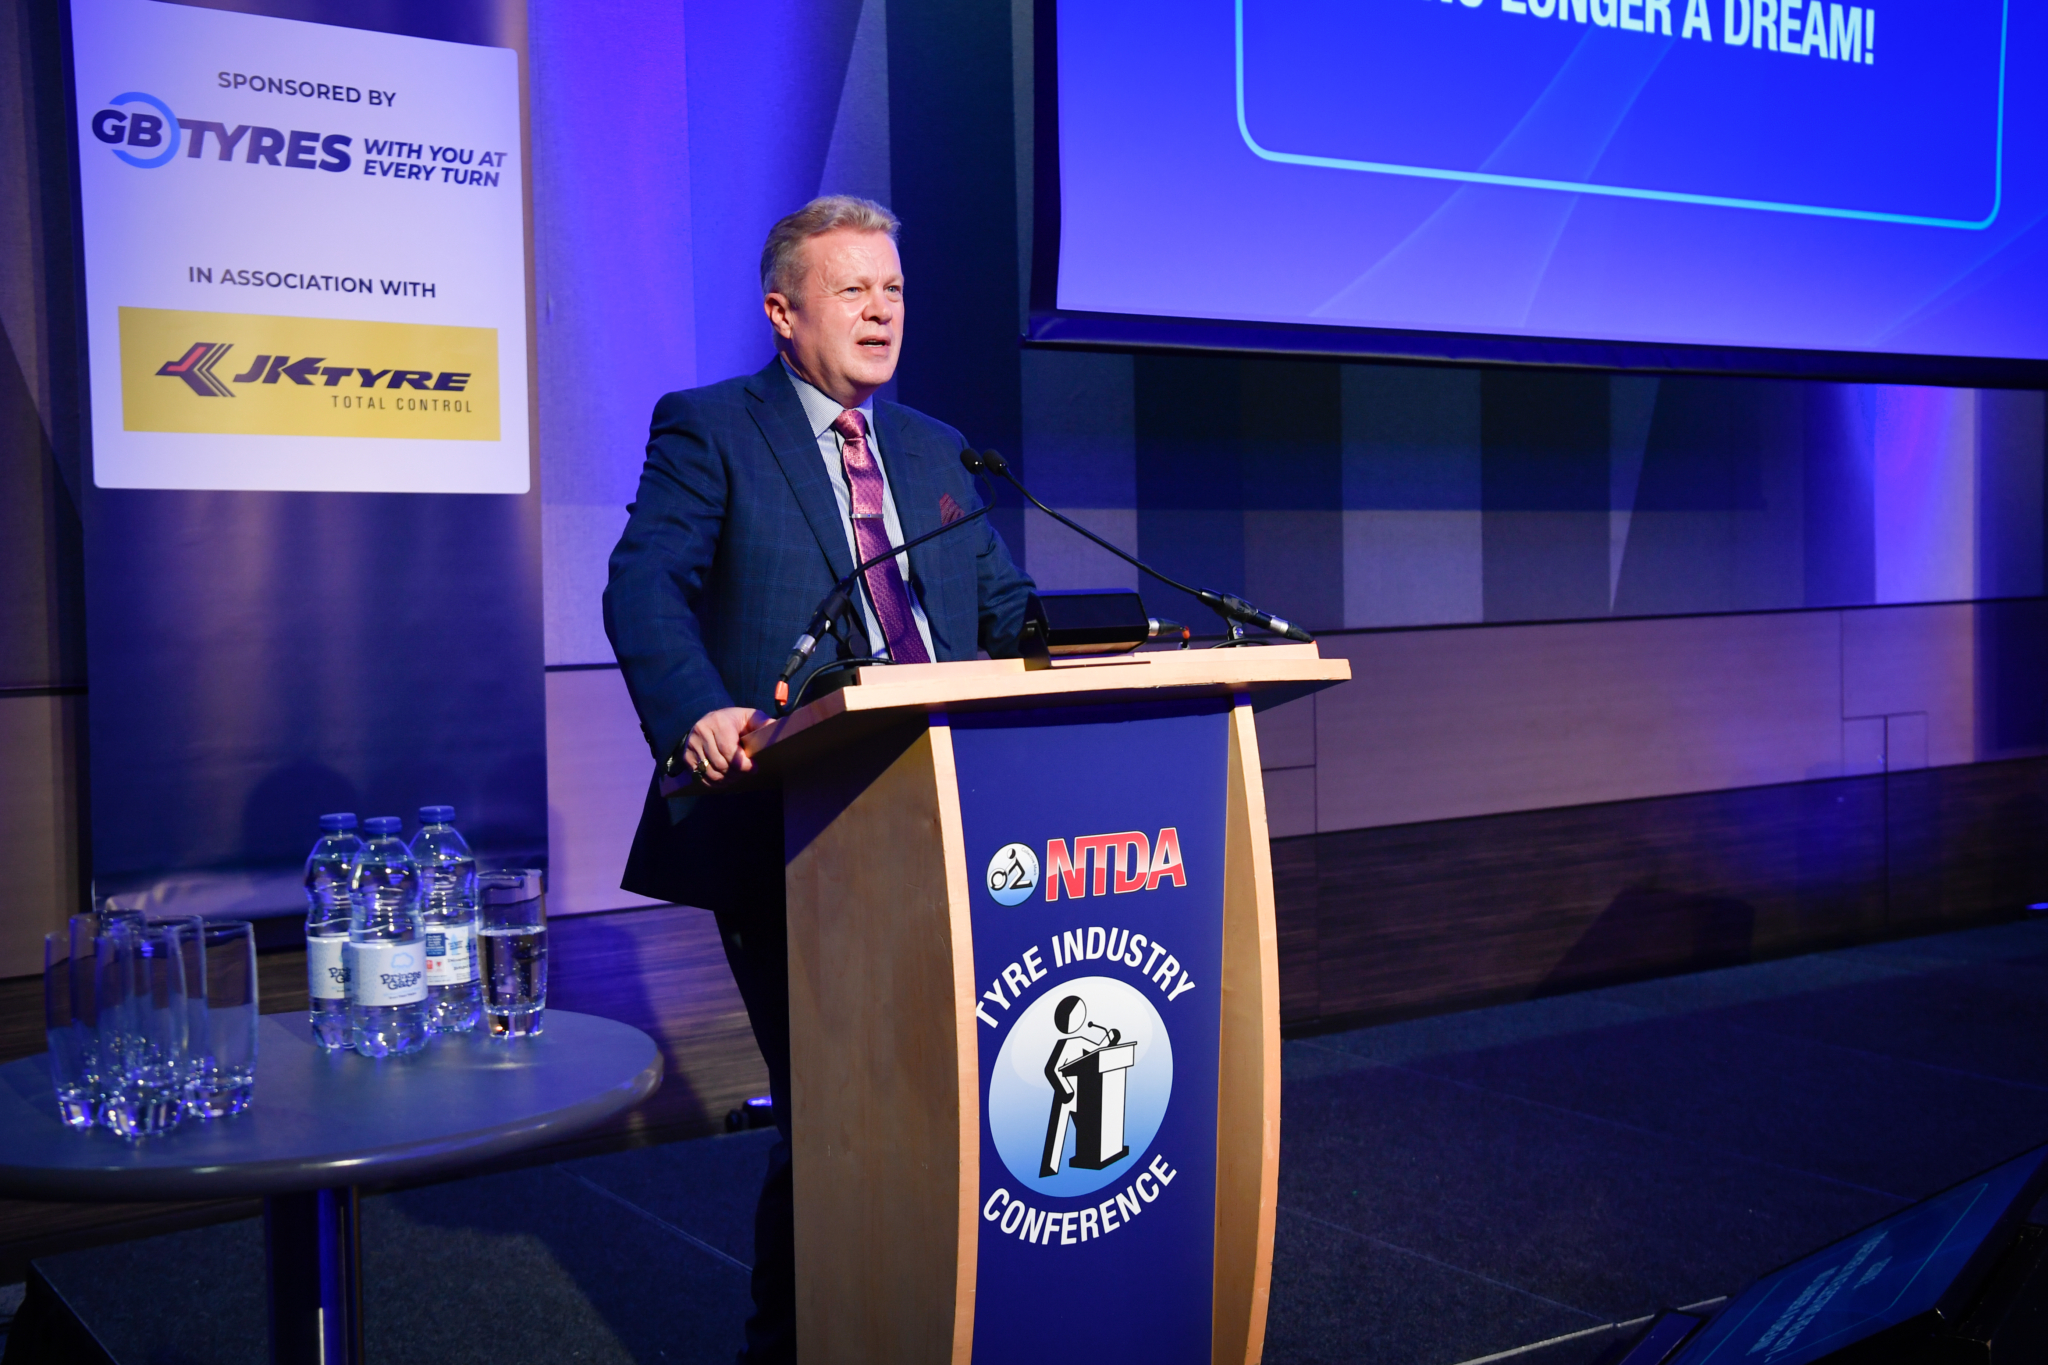 NTDA chief executive encourages distributors to work together to “make it happen”